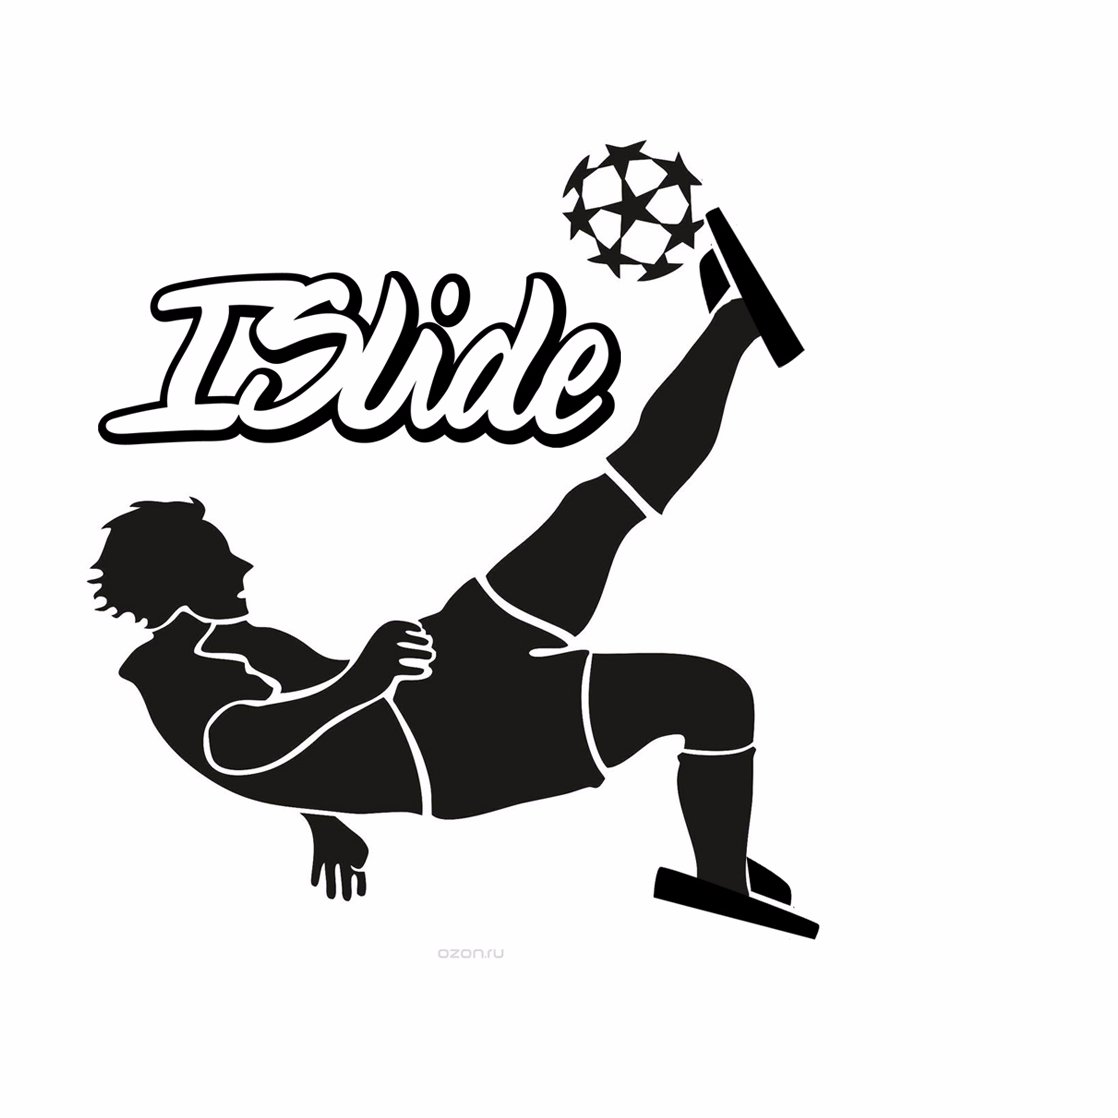 Official ISlide Soccer Twitter page!  
